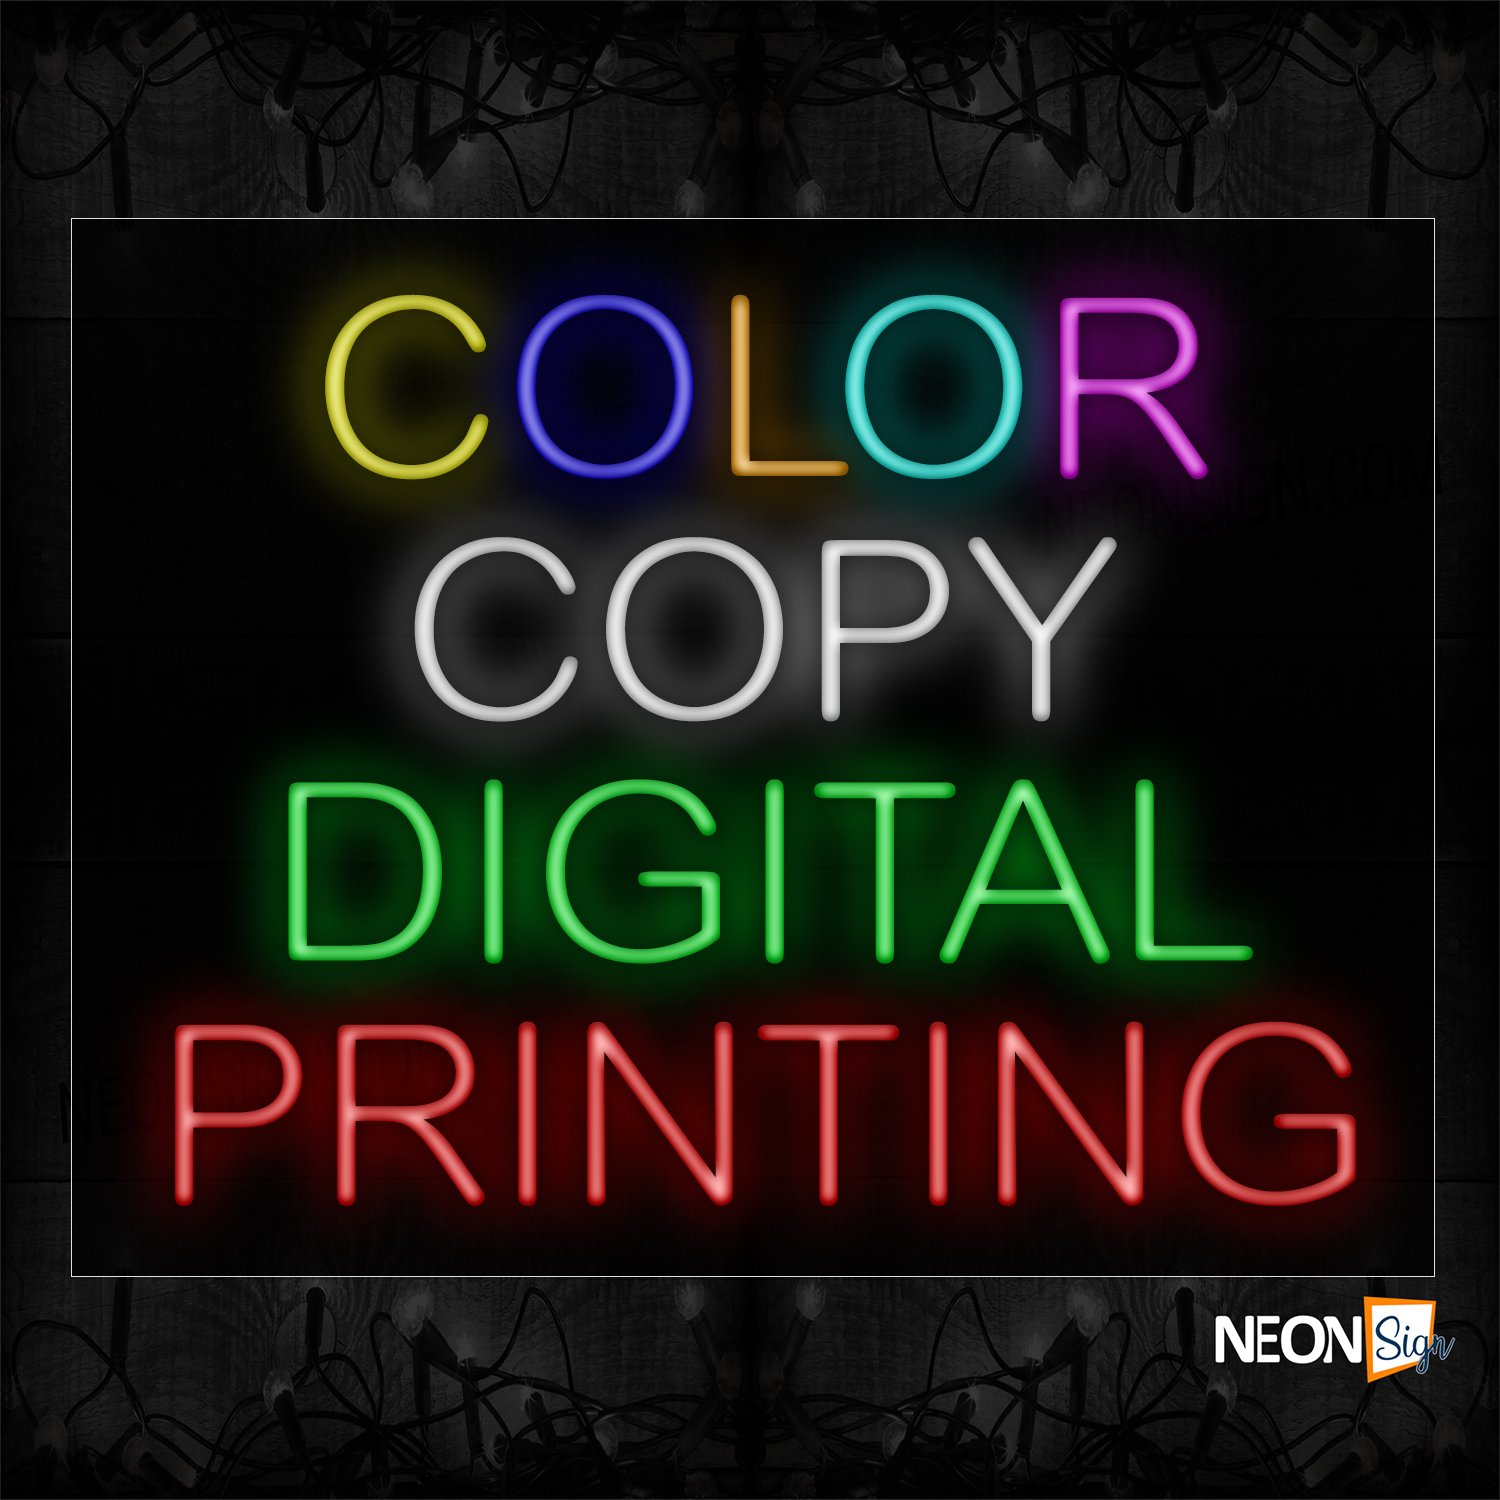 Image of 11681 Color Copy And Digital Printing All Colors Traditional Neon_24x31 Black Backing